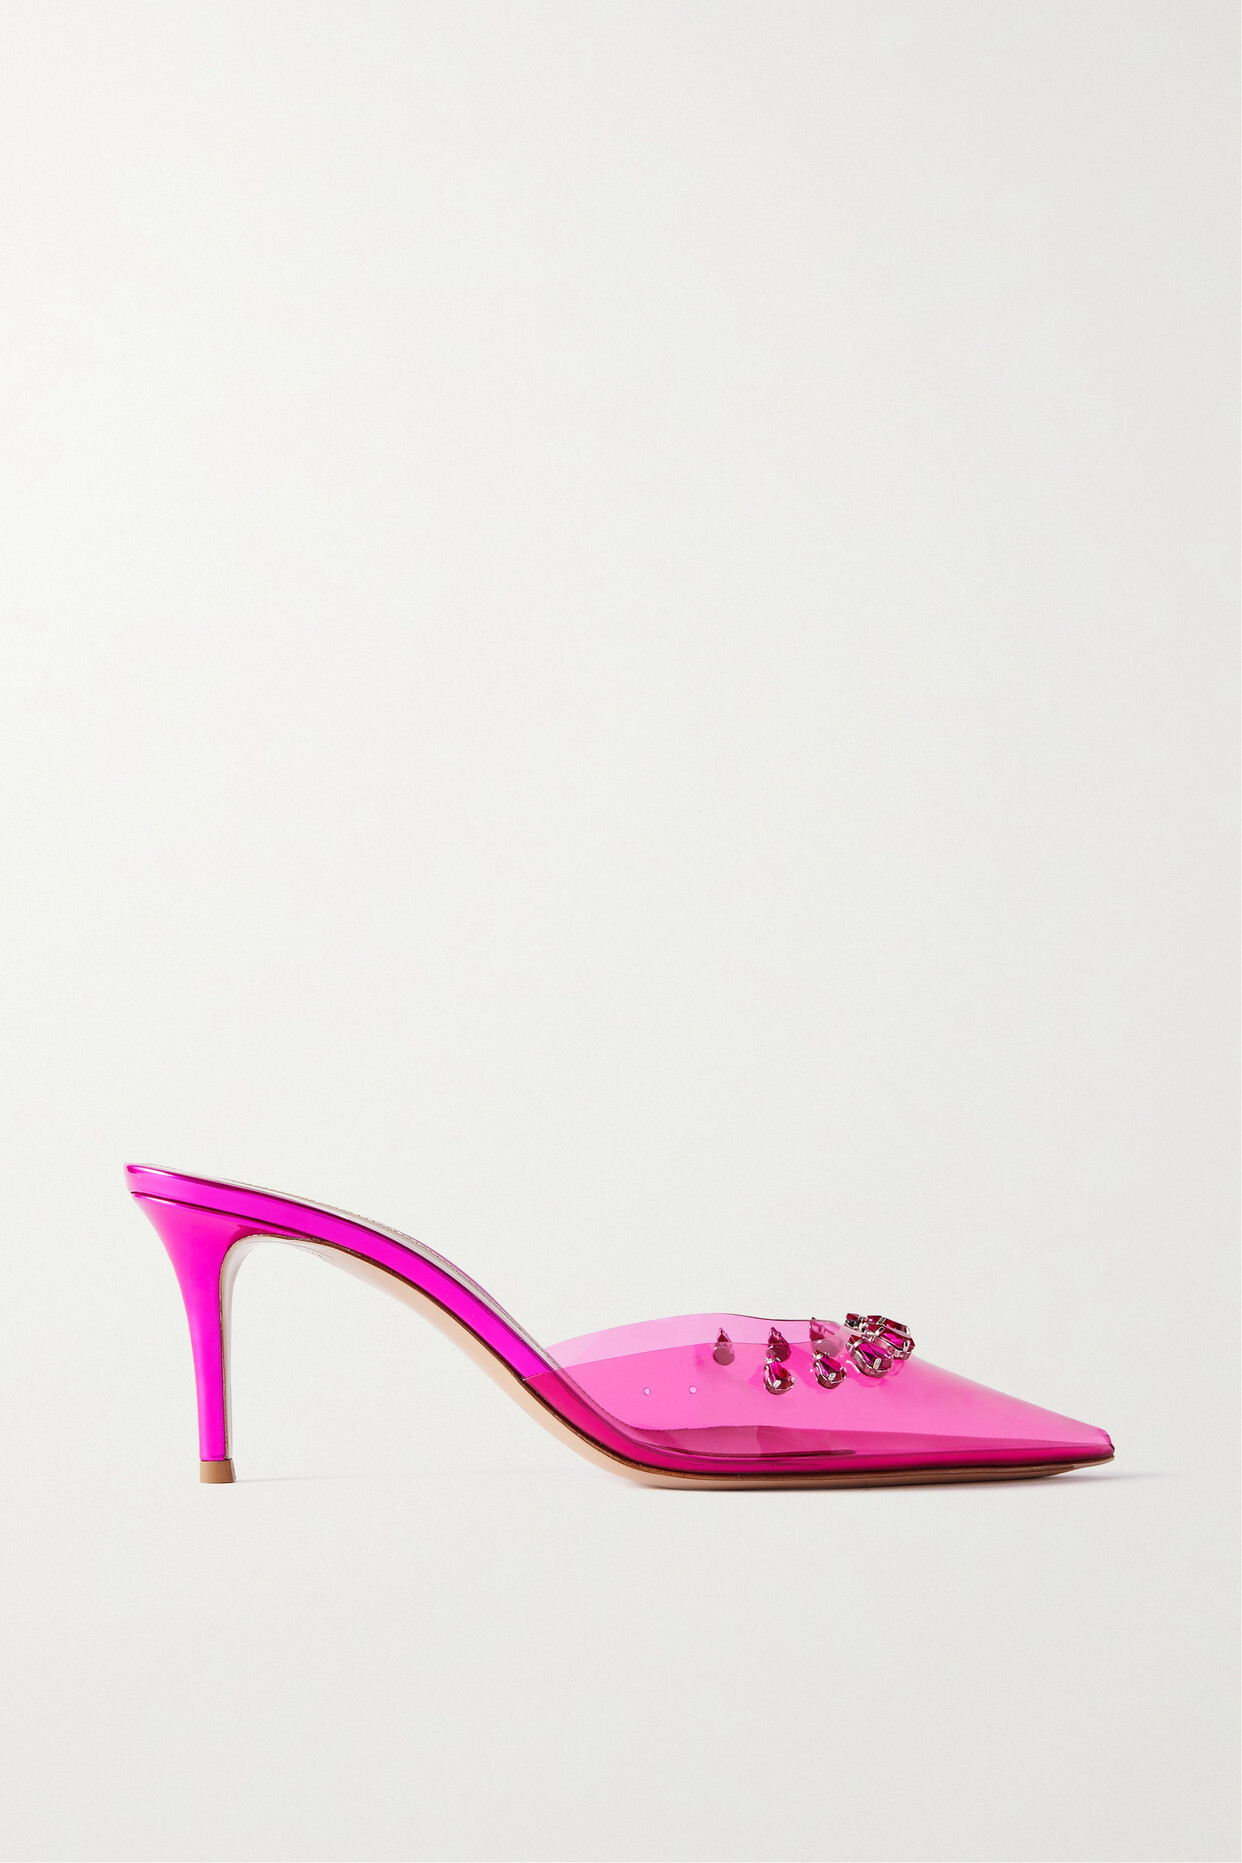 Gianvito Rossi - Bloom 70 Crystal-embellished Pvc Pumps - Pink